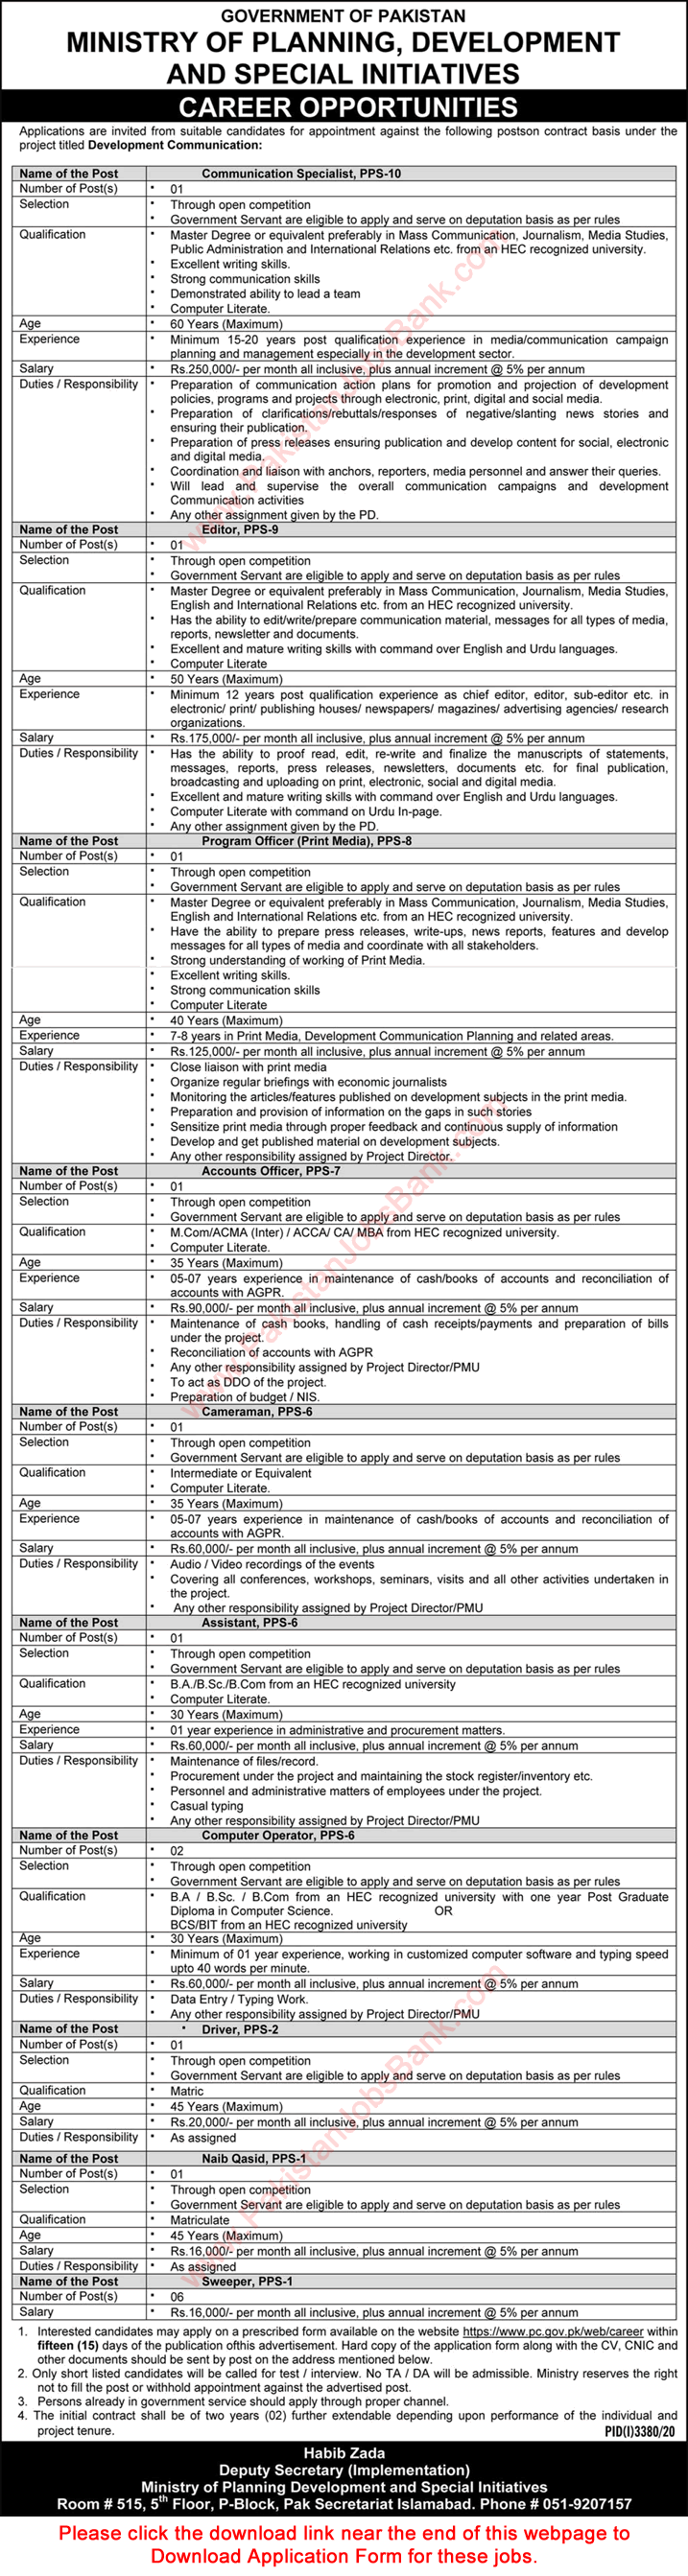 Ministry of Planning Development and Special Initiatives Jobs December 2020 Application Form Latest